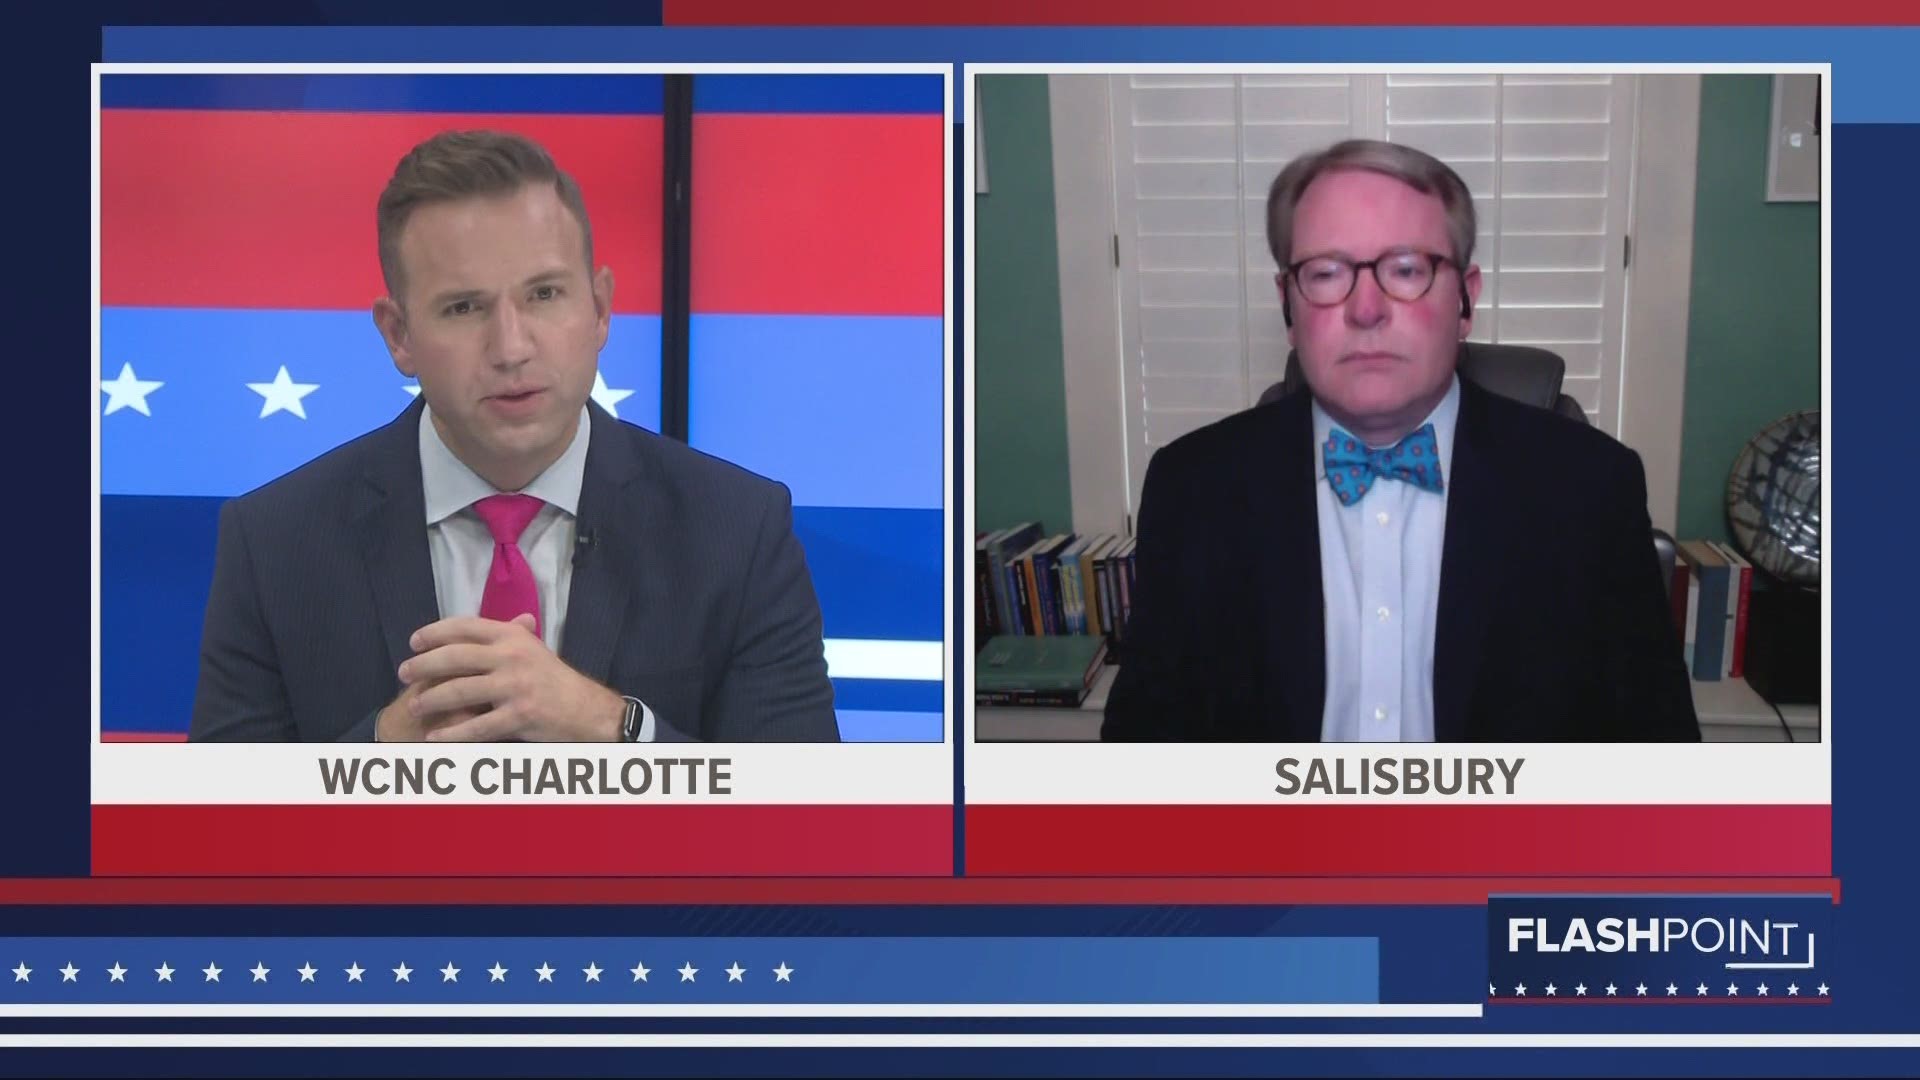 Flashpoint 8/30: Catawba College political science professor, Dr. Michael Bitzer give an analysis of the RNC and an update about absentee ballots in North Carolina.